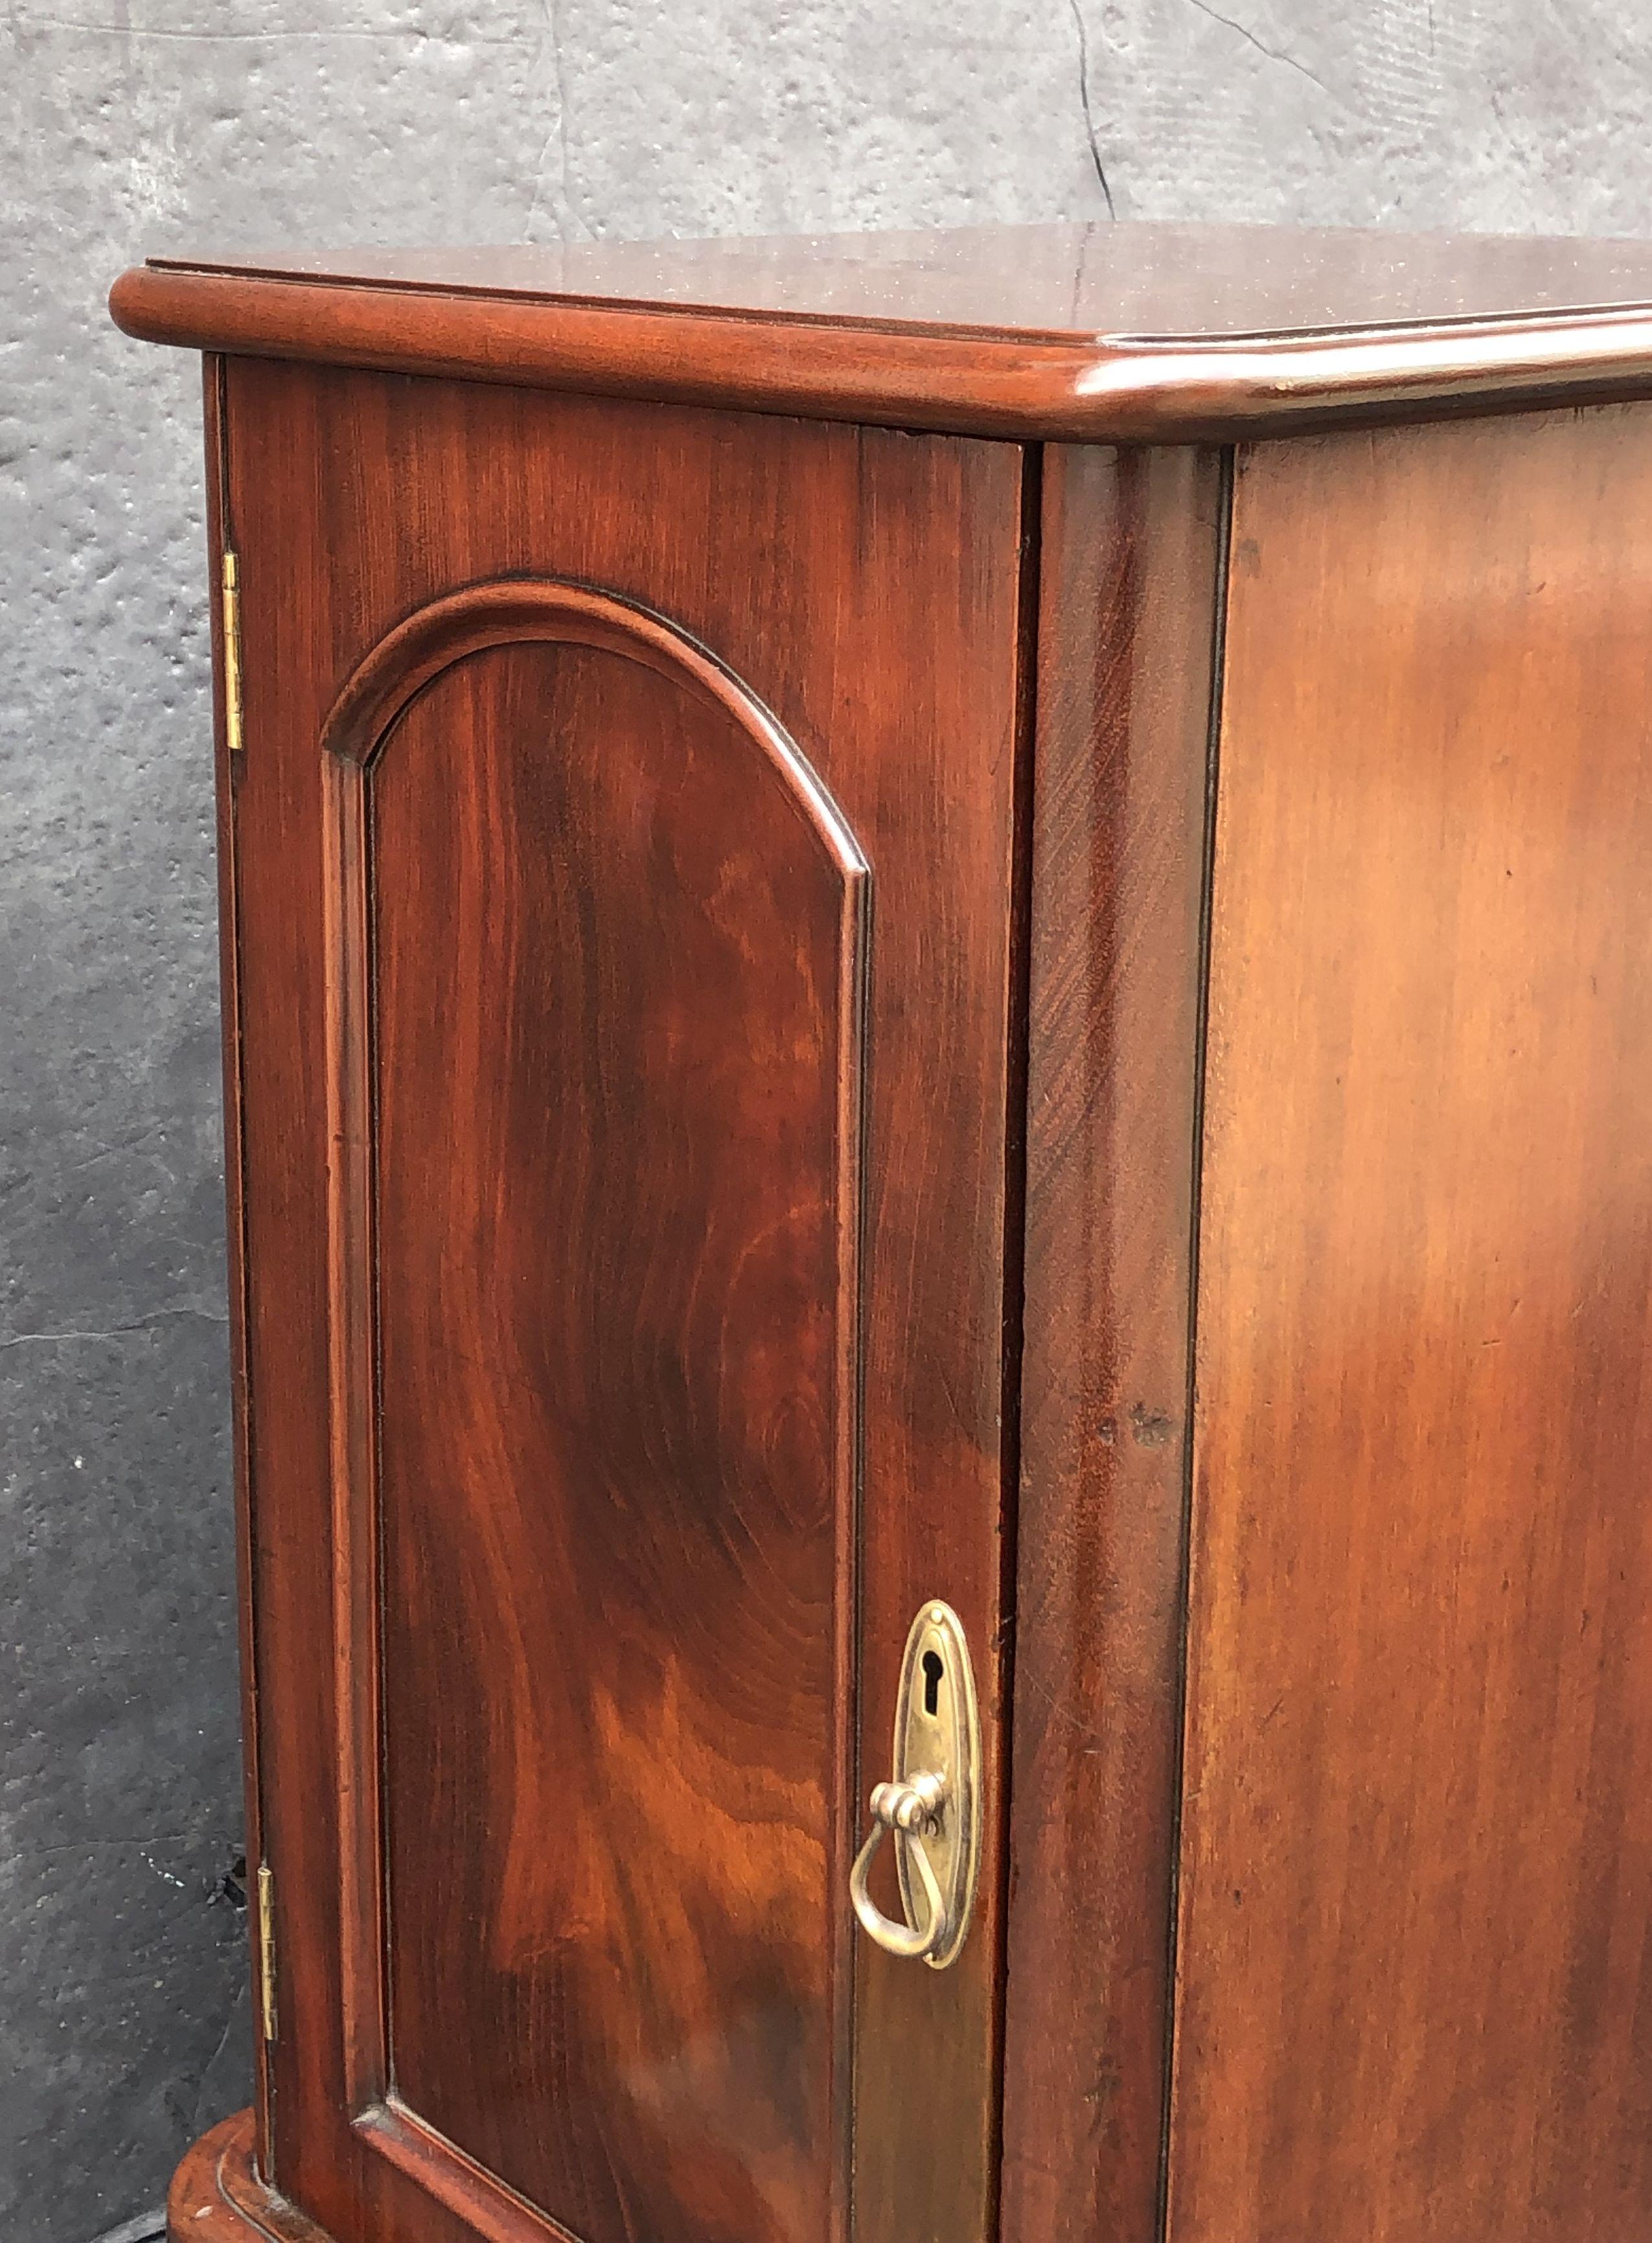 English Bedside Chests or Cabinet Nightstands of Mahogany, Priced as a Pair 5